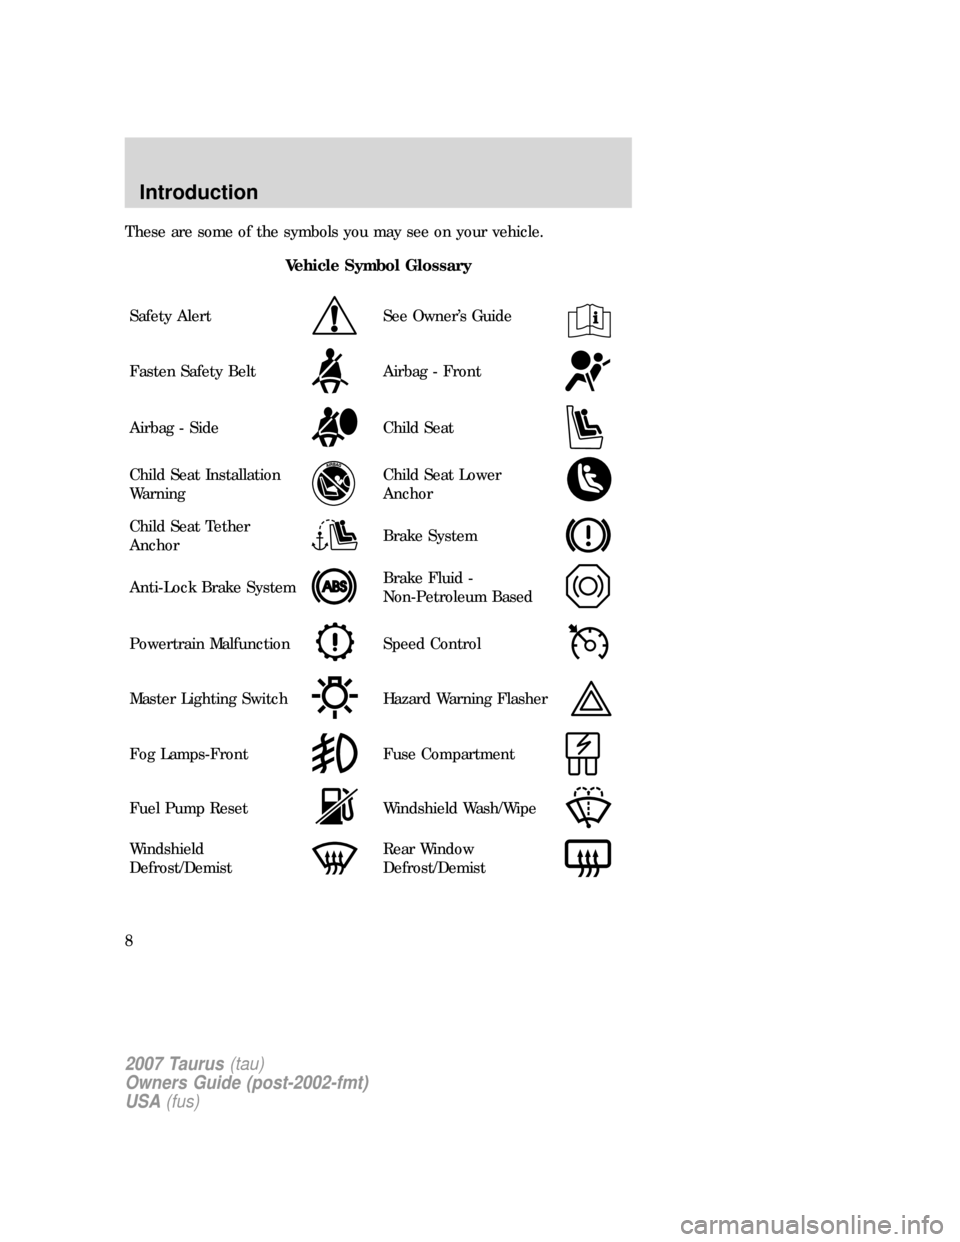 FORD TAURUS 2007 4.G Owners Manual These are some of the symbols you may see on your vehicle.
Vehicle Symbol Glossary
Safety Alert
See Owner’s Guide
Fasten Safety BeltAirbag - Front
Airbag - SideChild Seat
Child Seat Installation
War